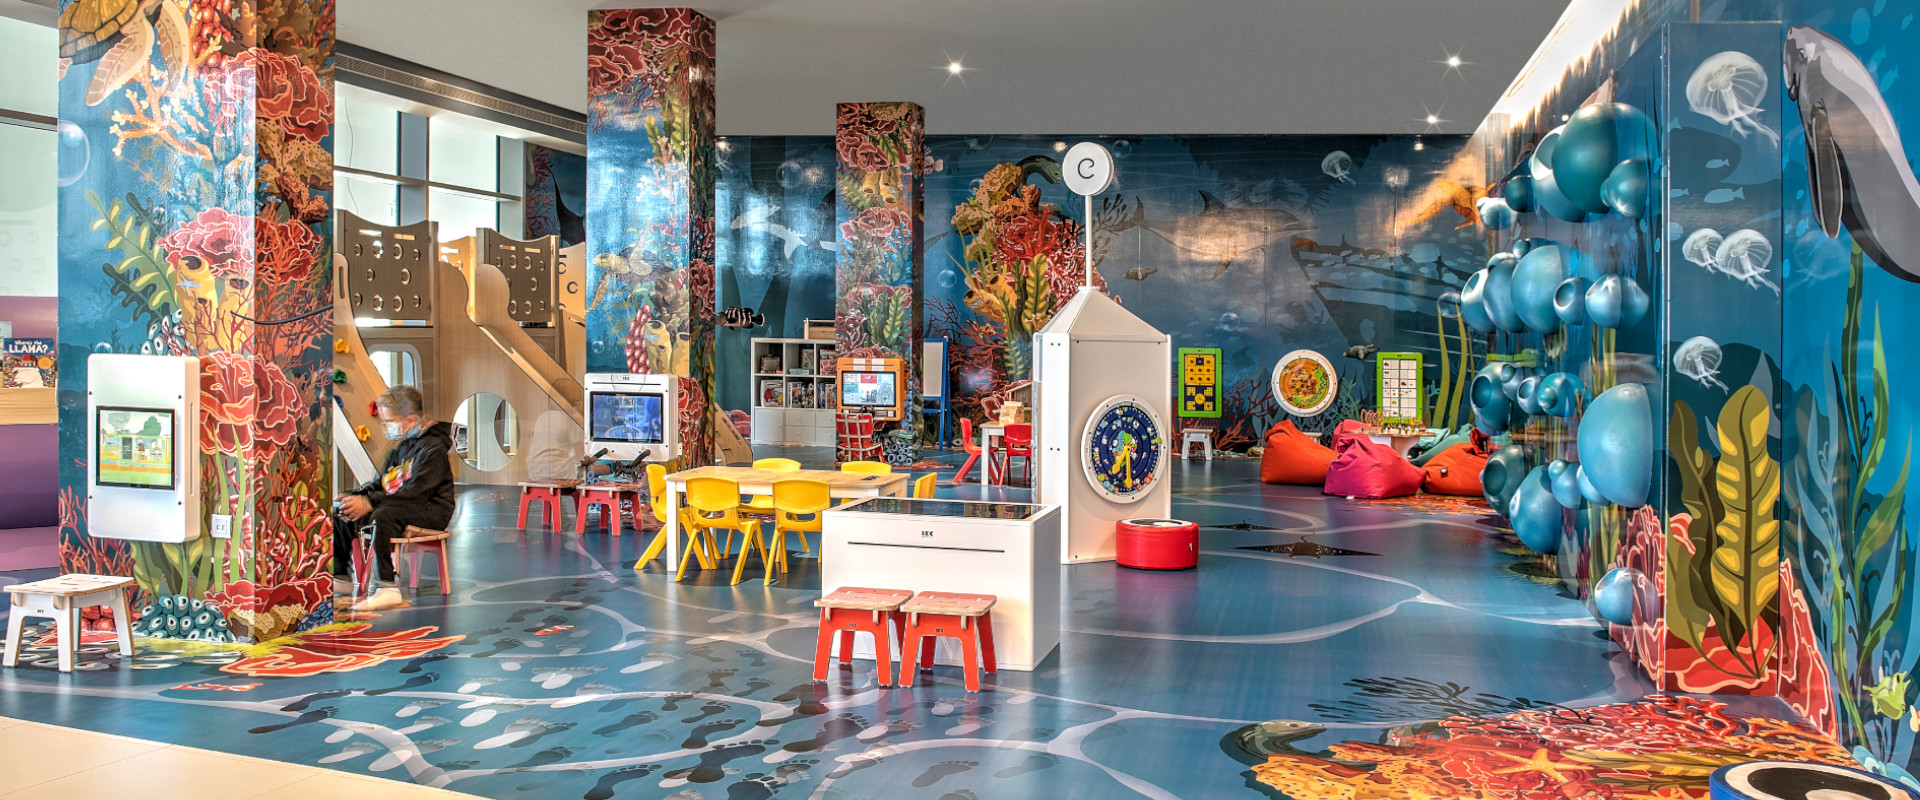 A kids indoor playground with a sea life theme for inspiration